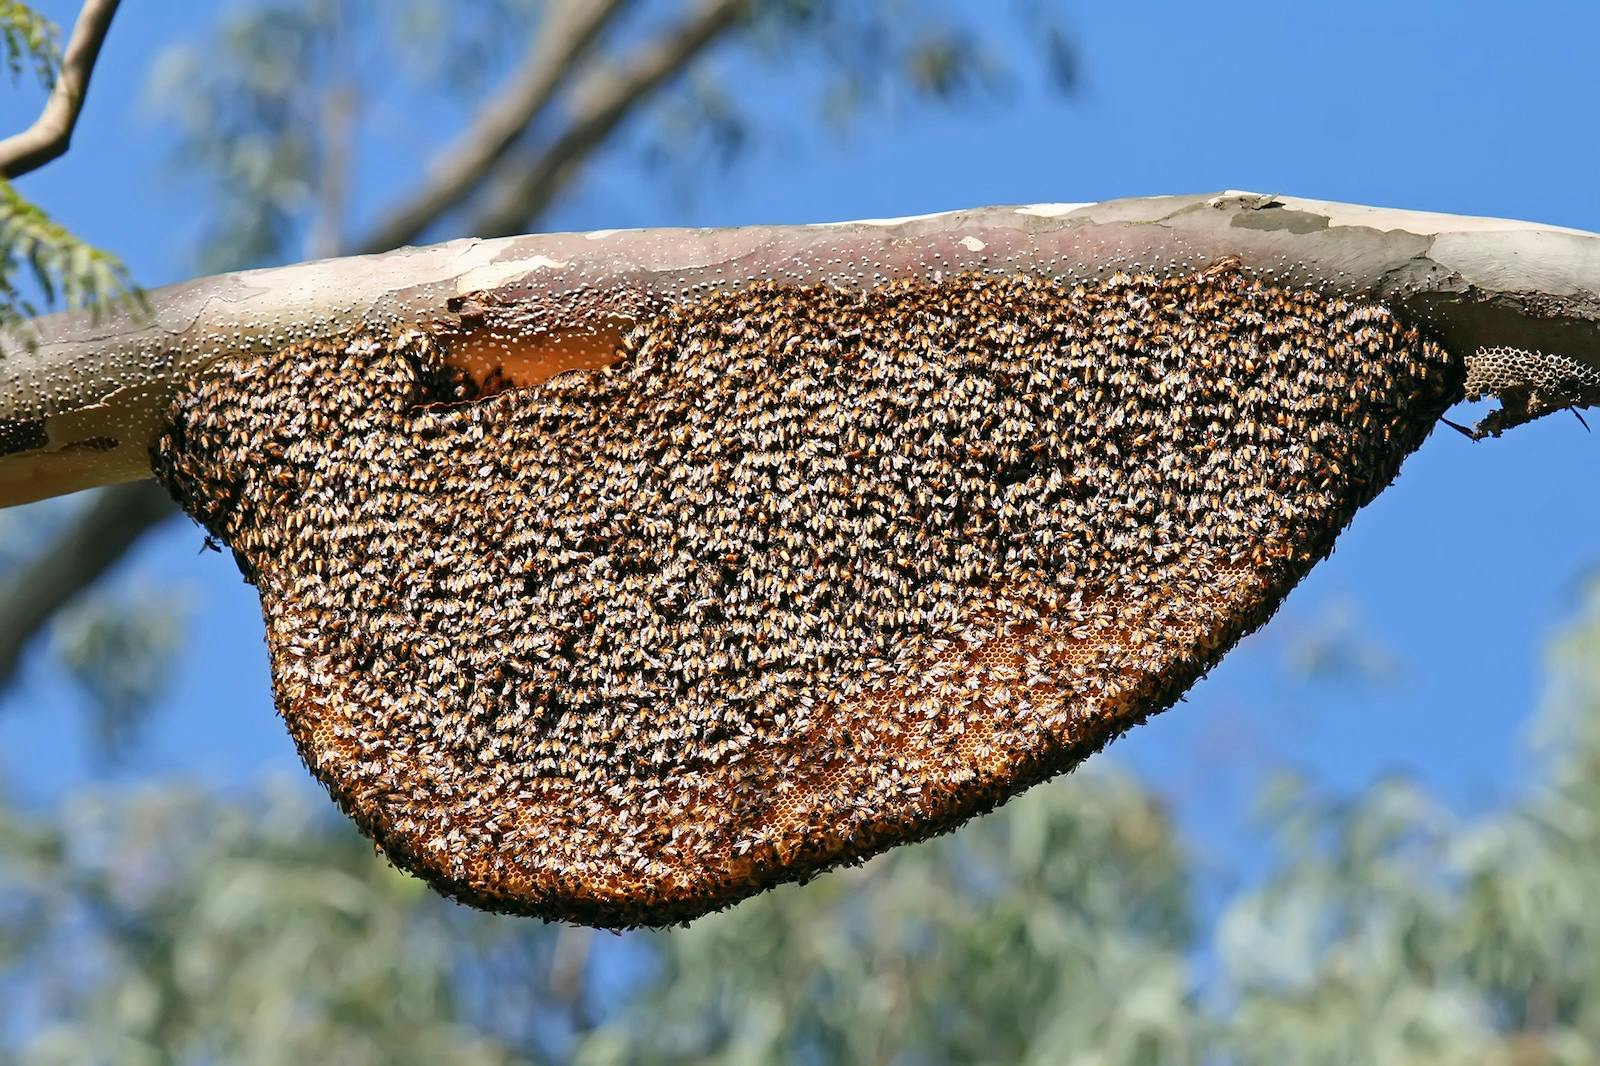 A colony of Apis dorsata or the rock bee, a native honey bee found in India. Bees are important pollinators that ensure food security and sustaining biodiversity.